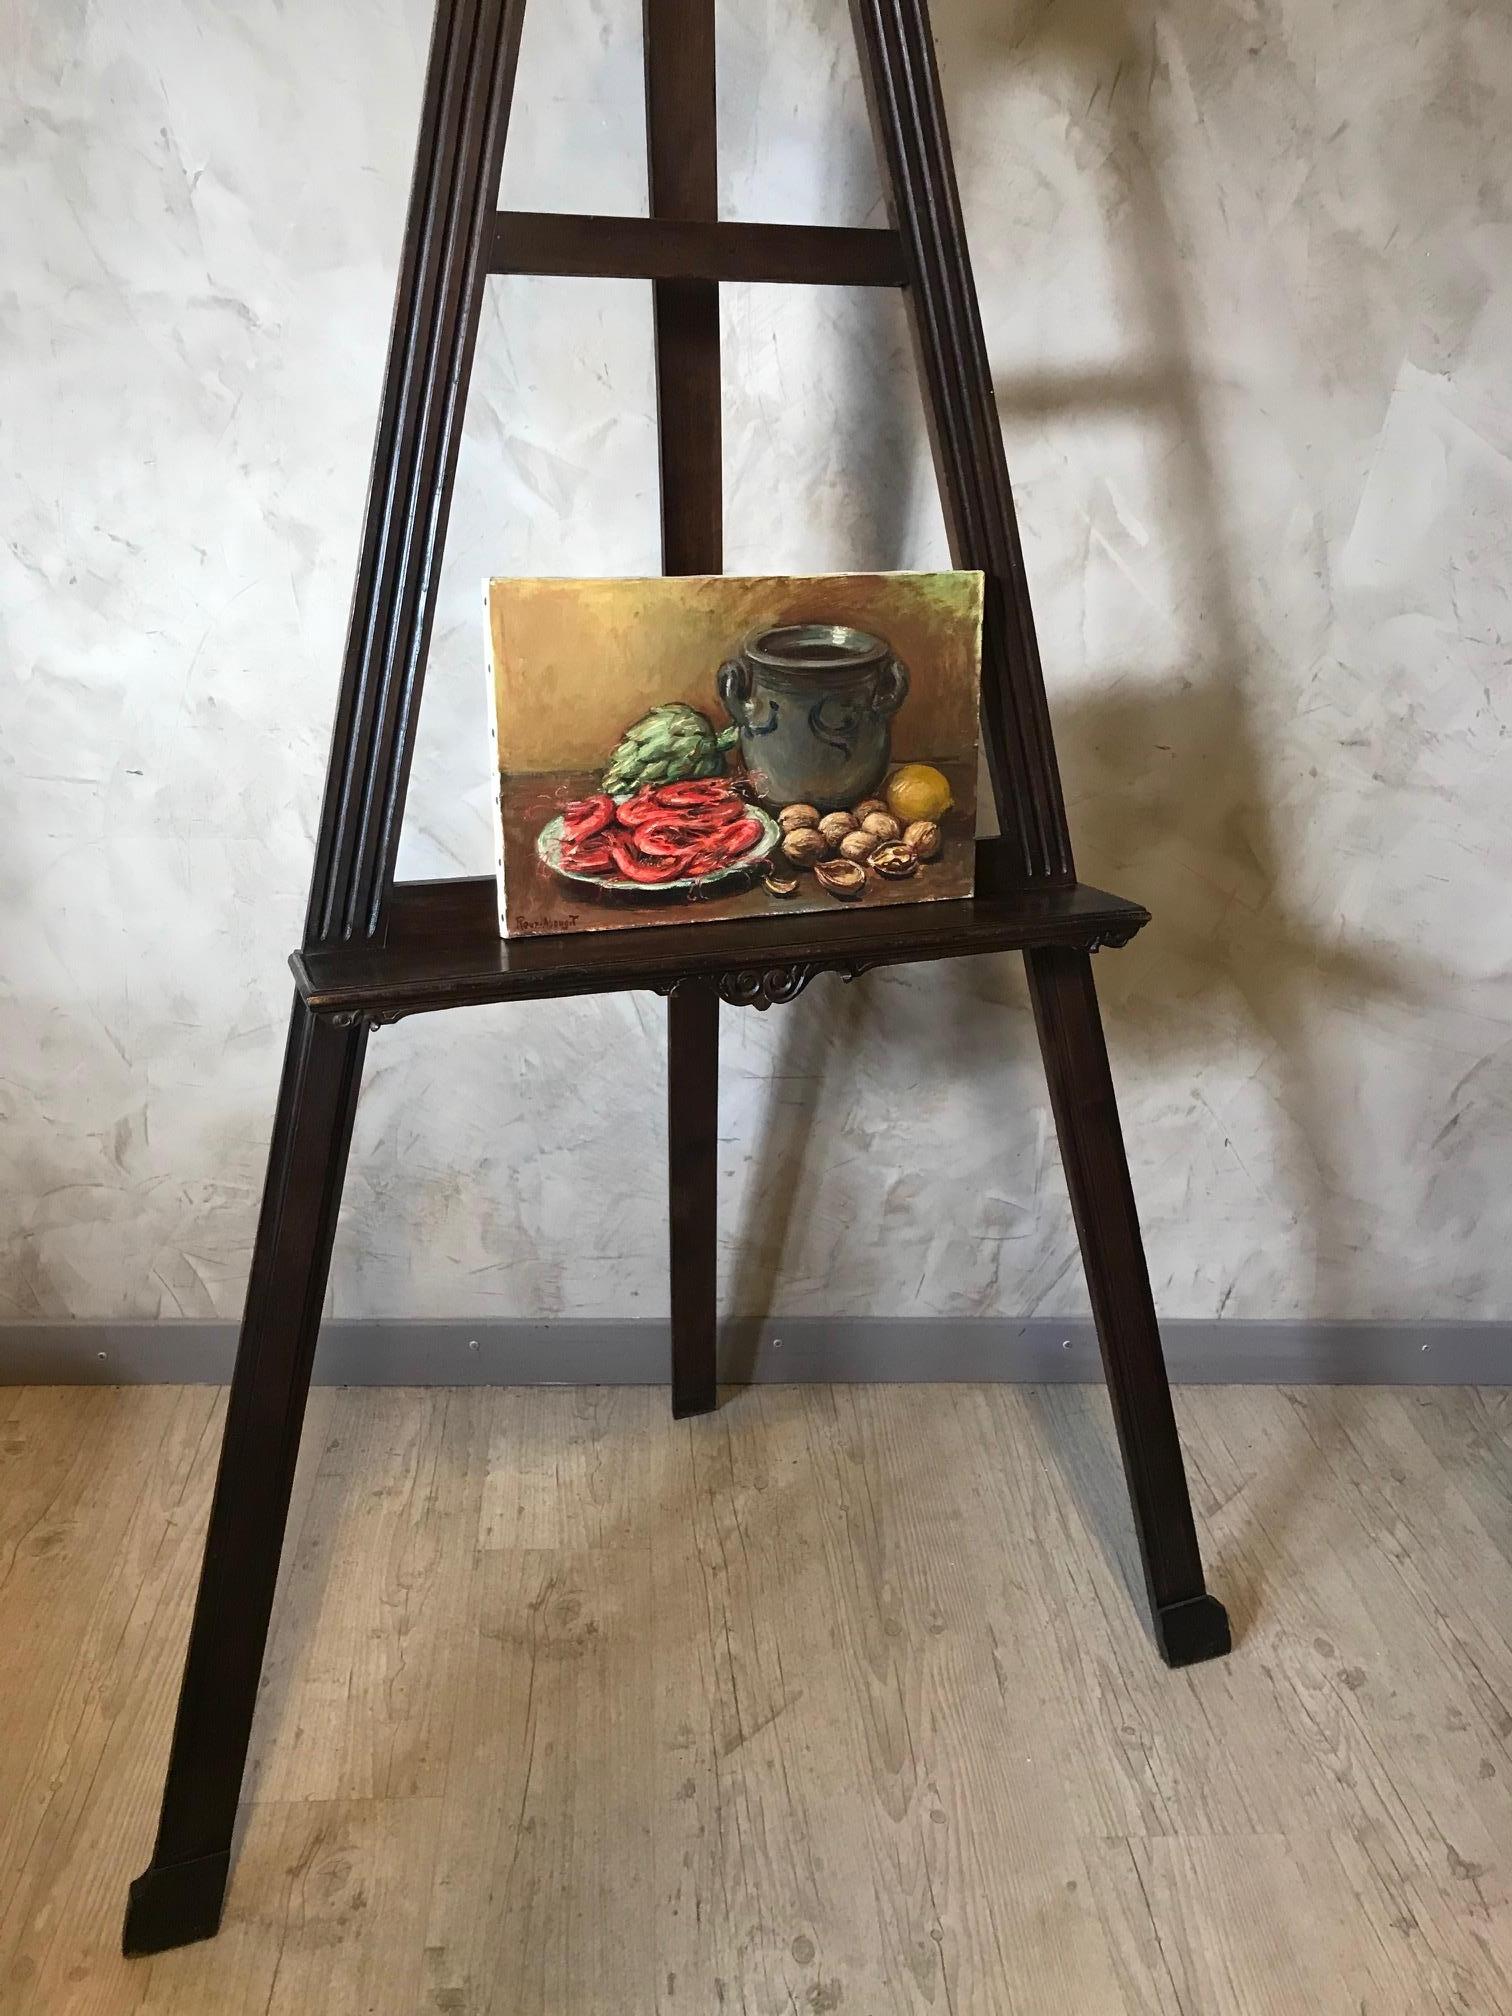 20th Century French Still-Life Oil on Canvas Signed Roux-Abougit, 1930s For Sale 2